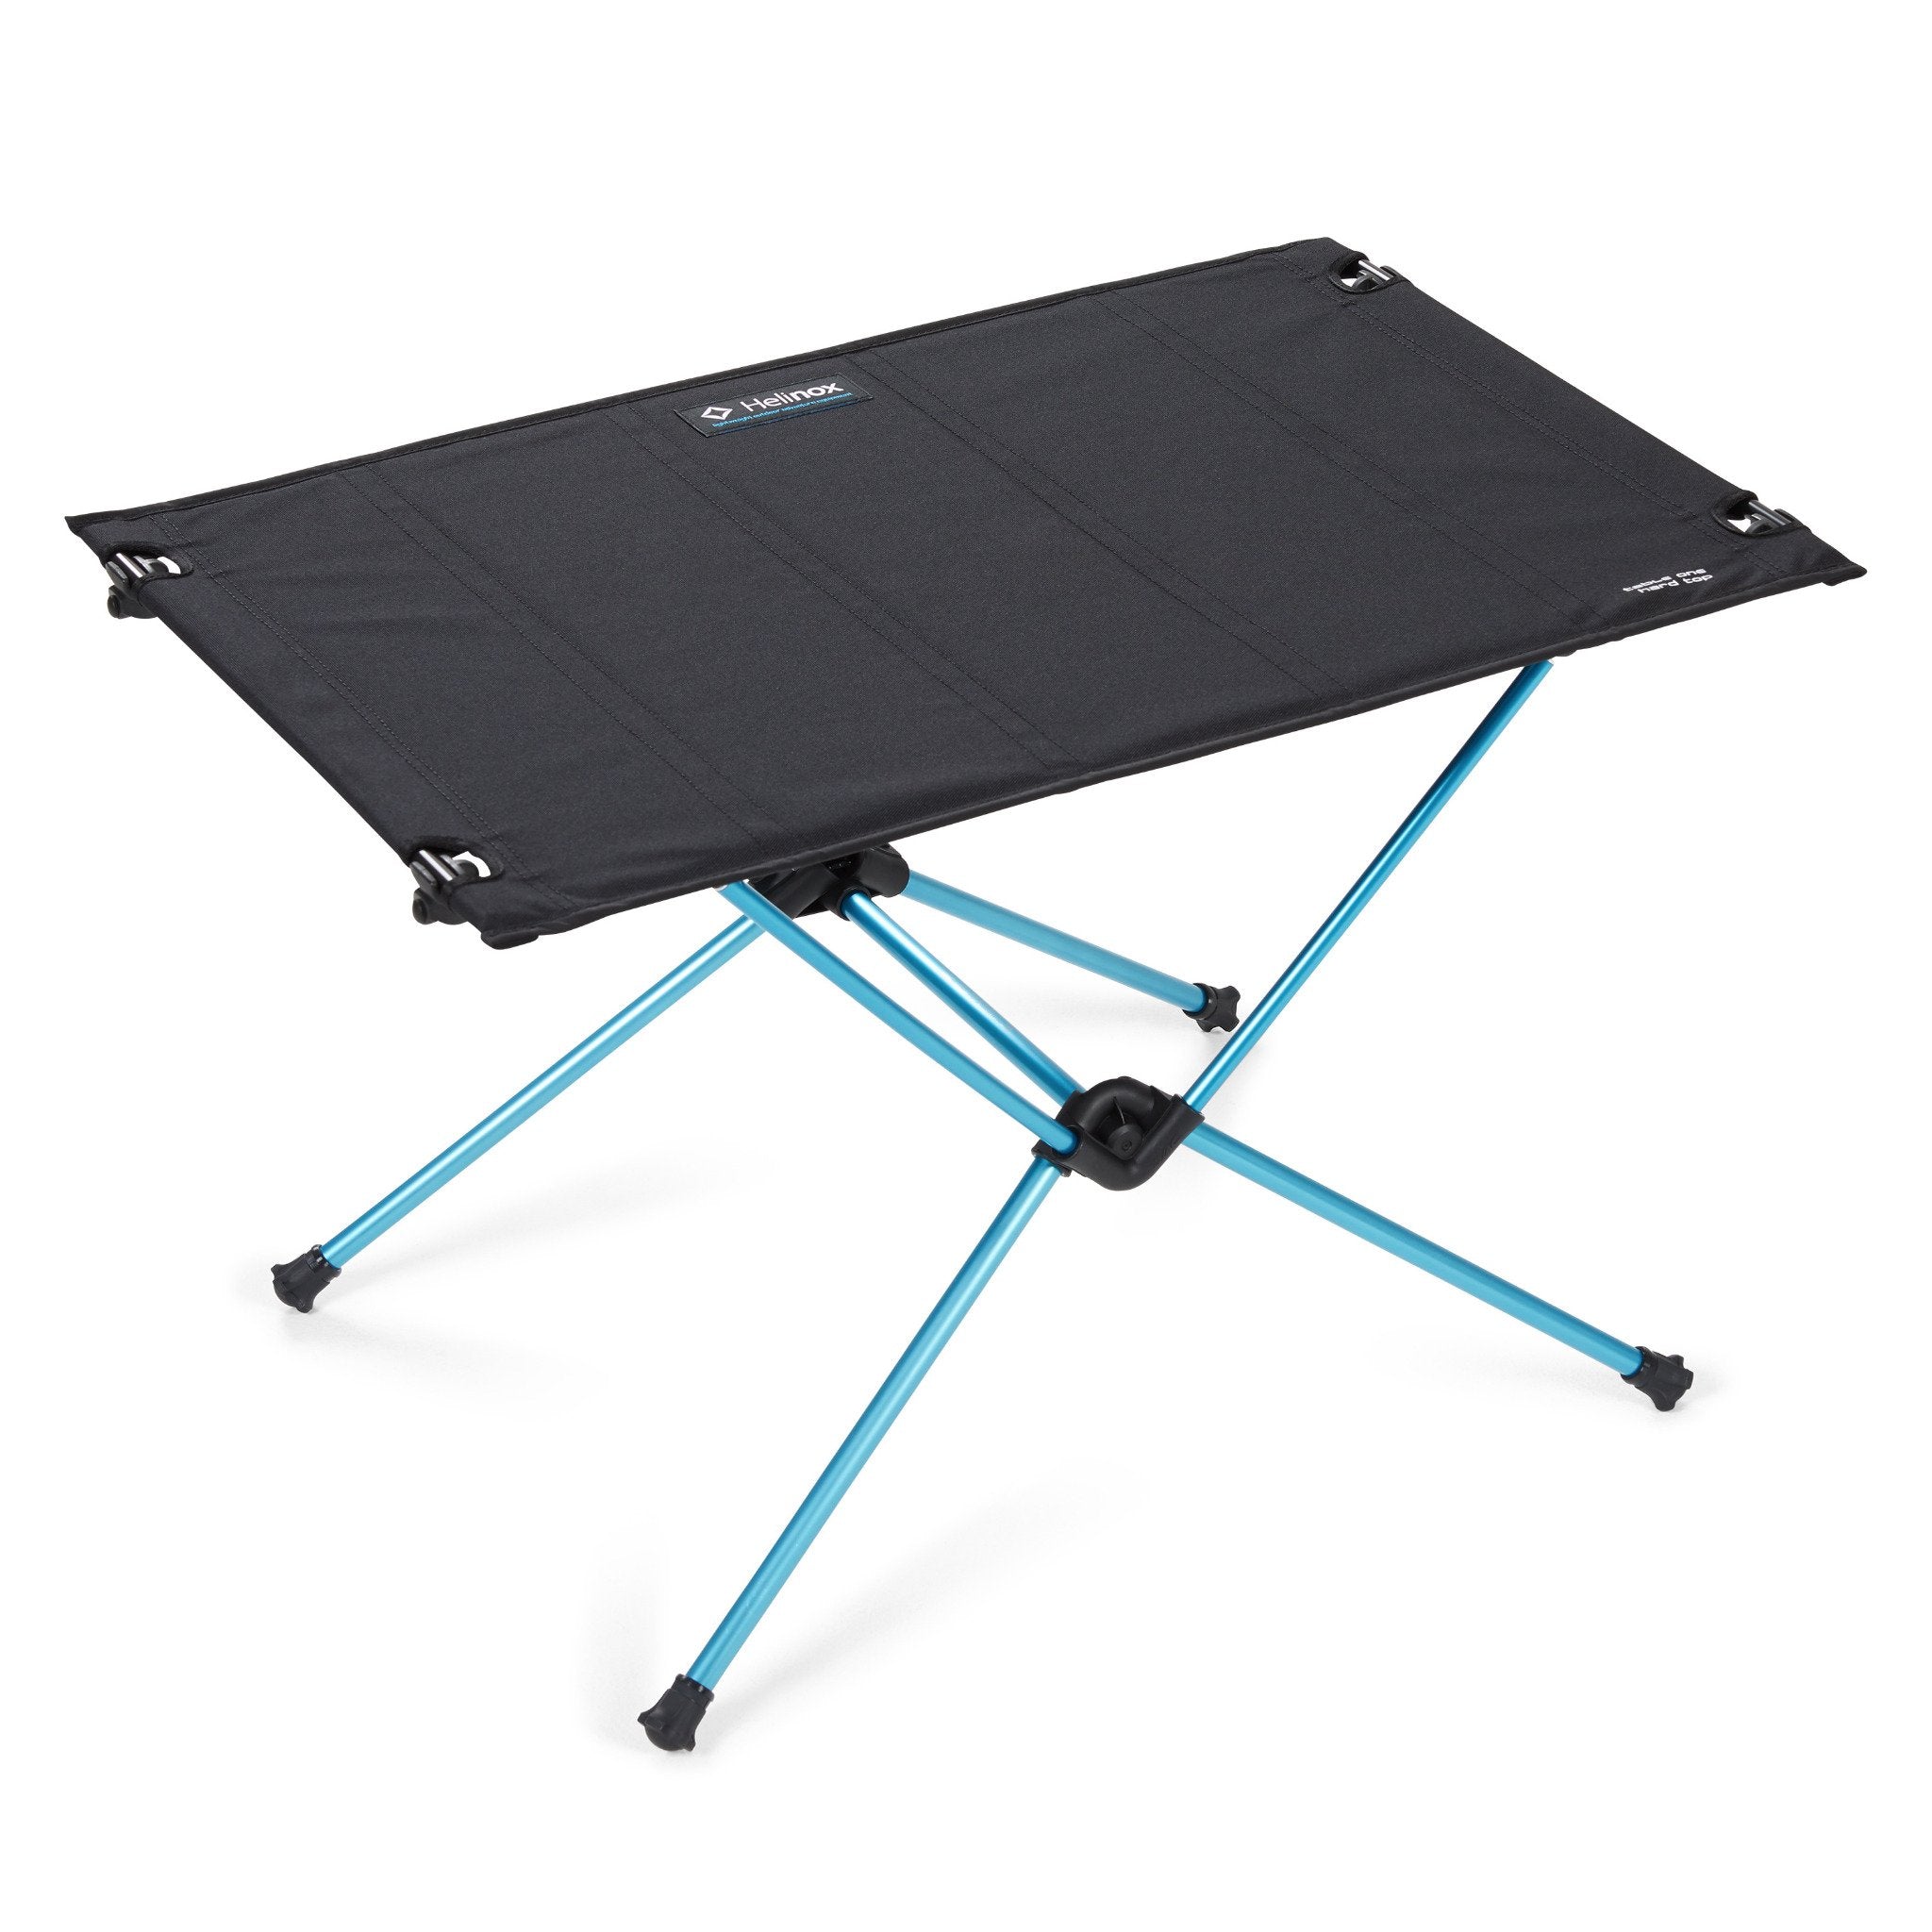 HELINOX Table One Hard Top - Black with Blue Frame